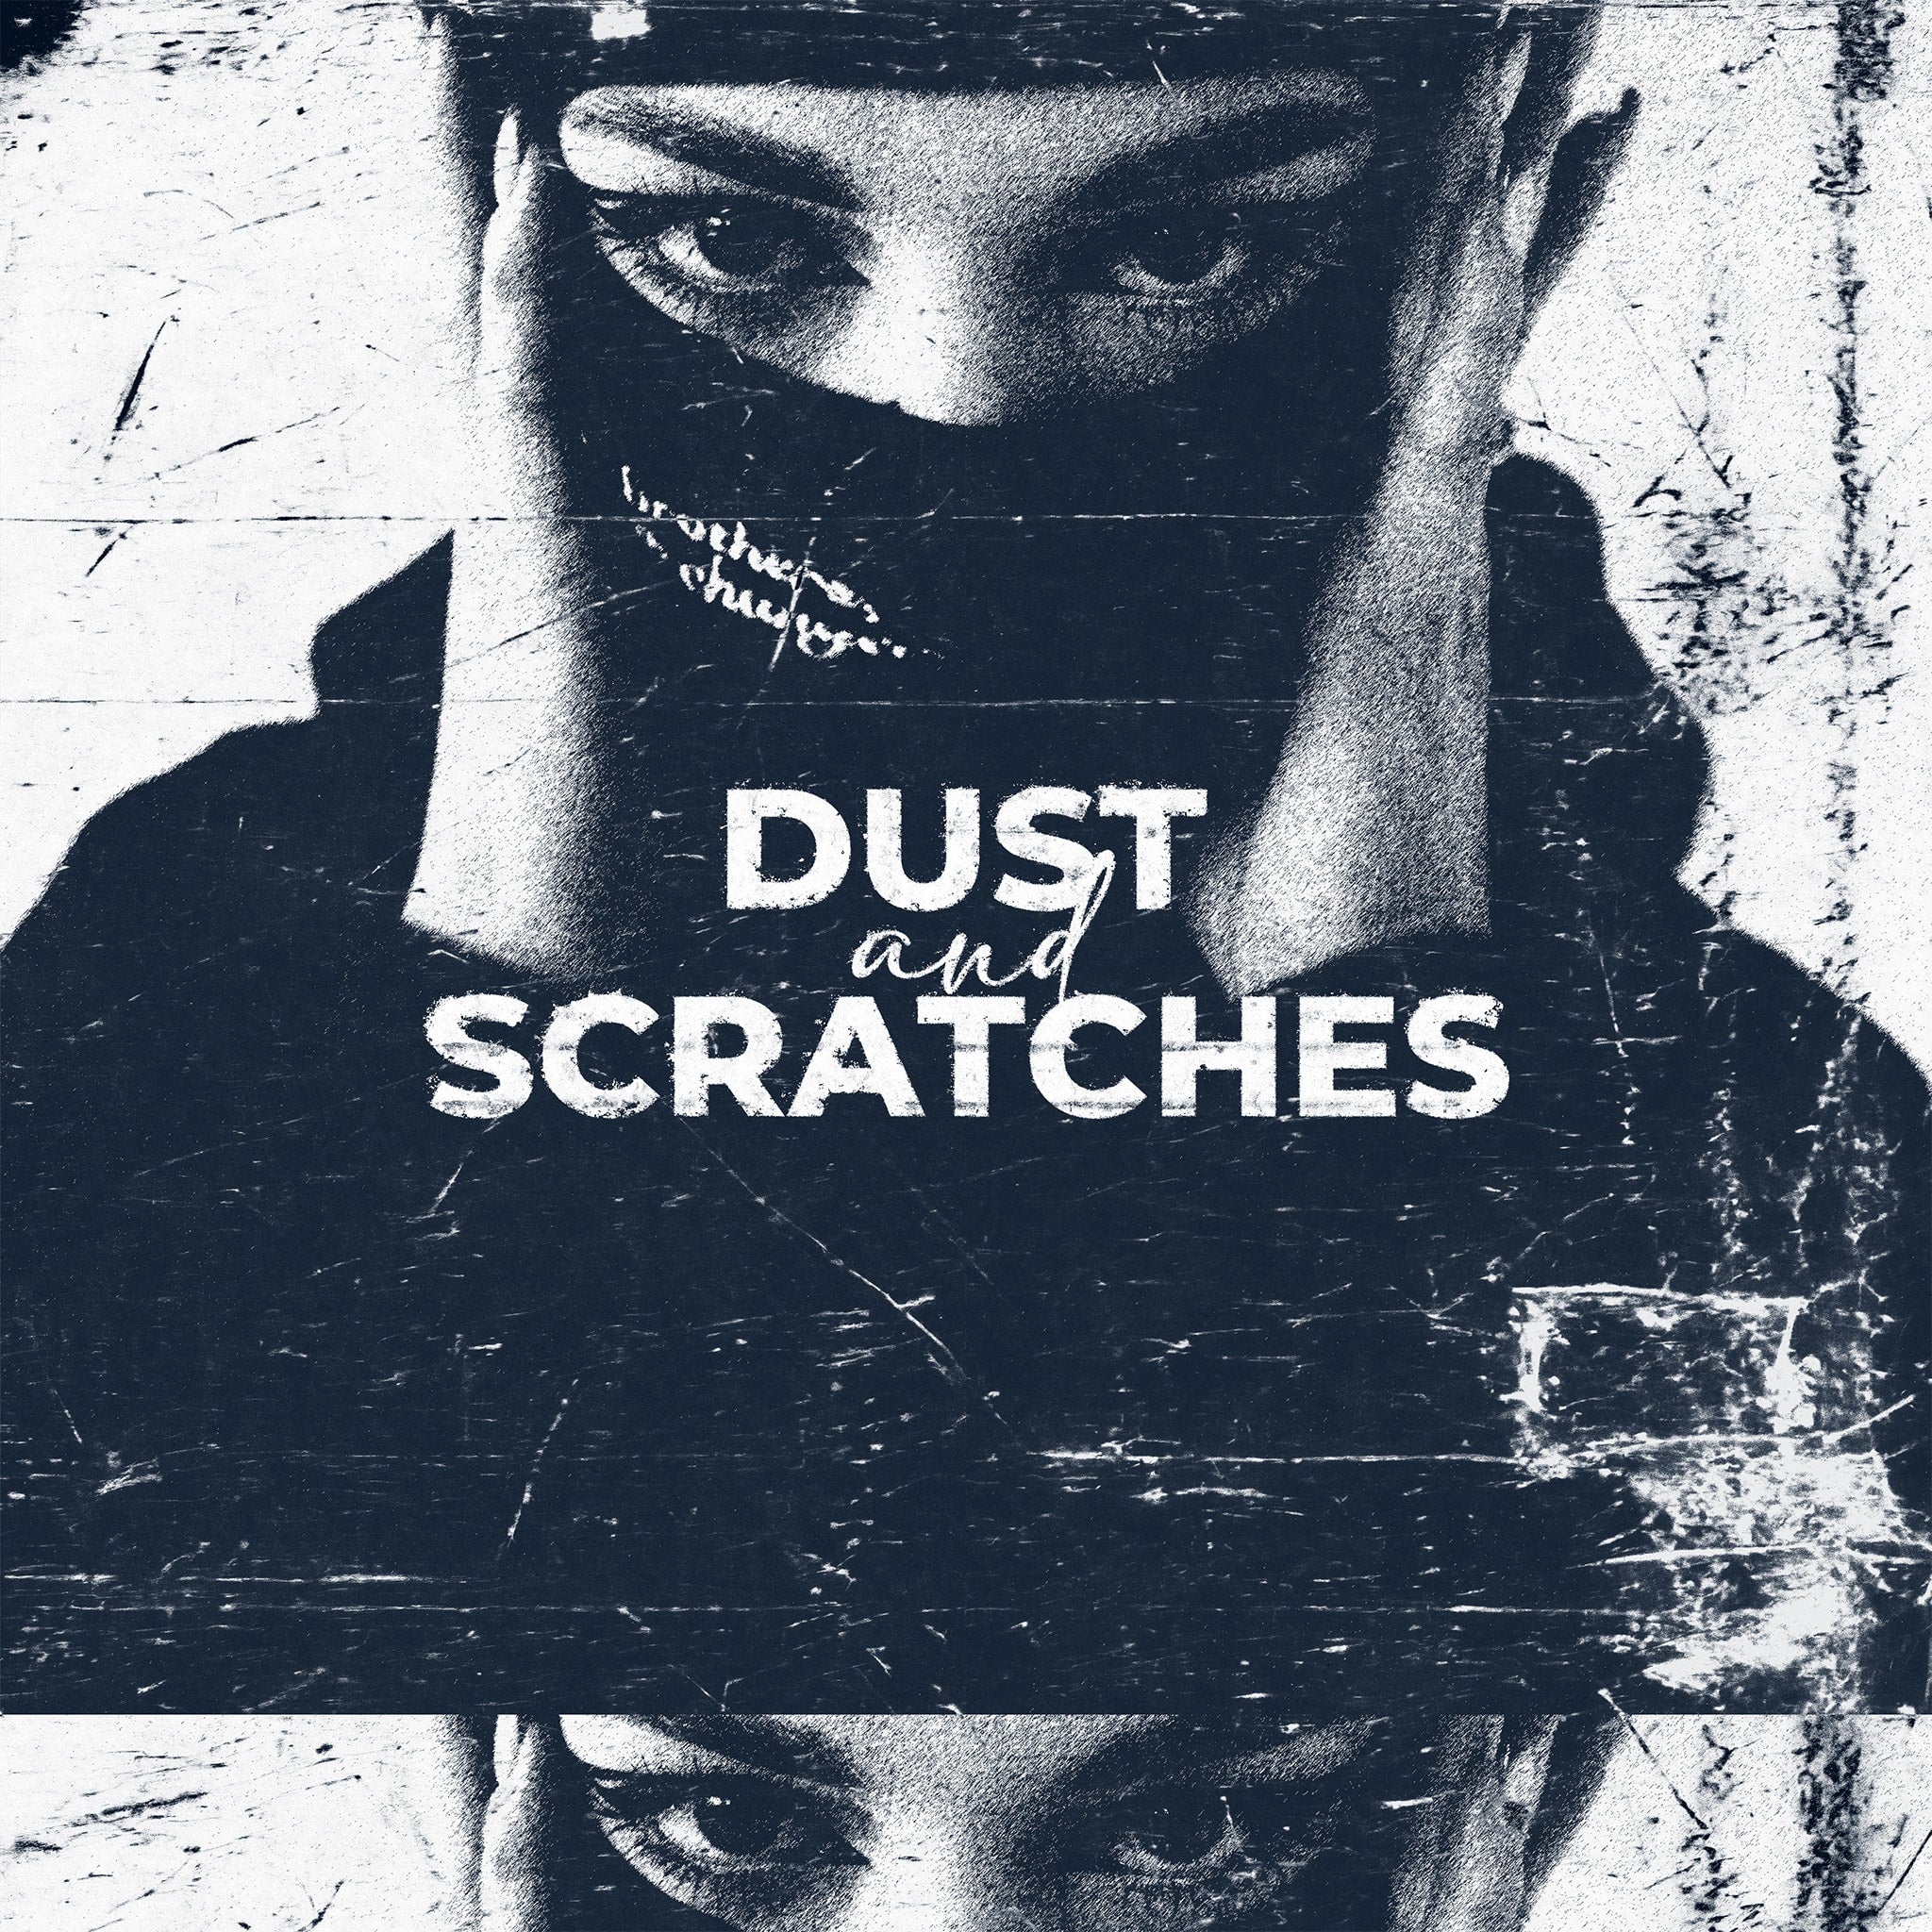 DUST AND SCRATCHES